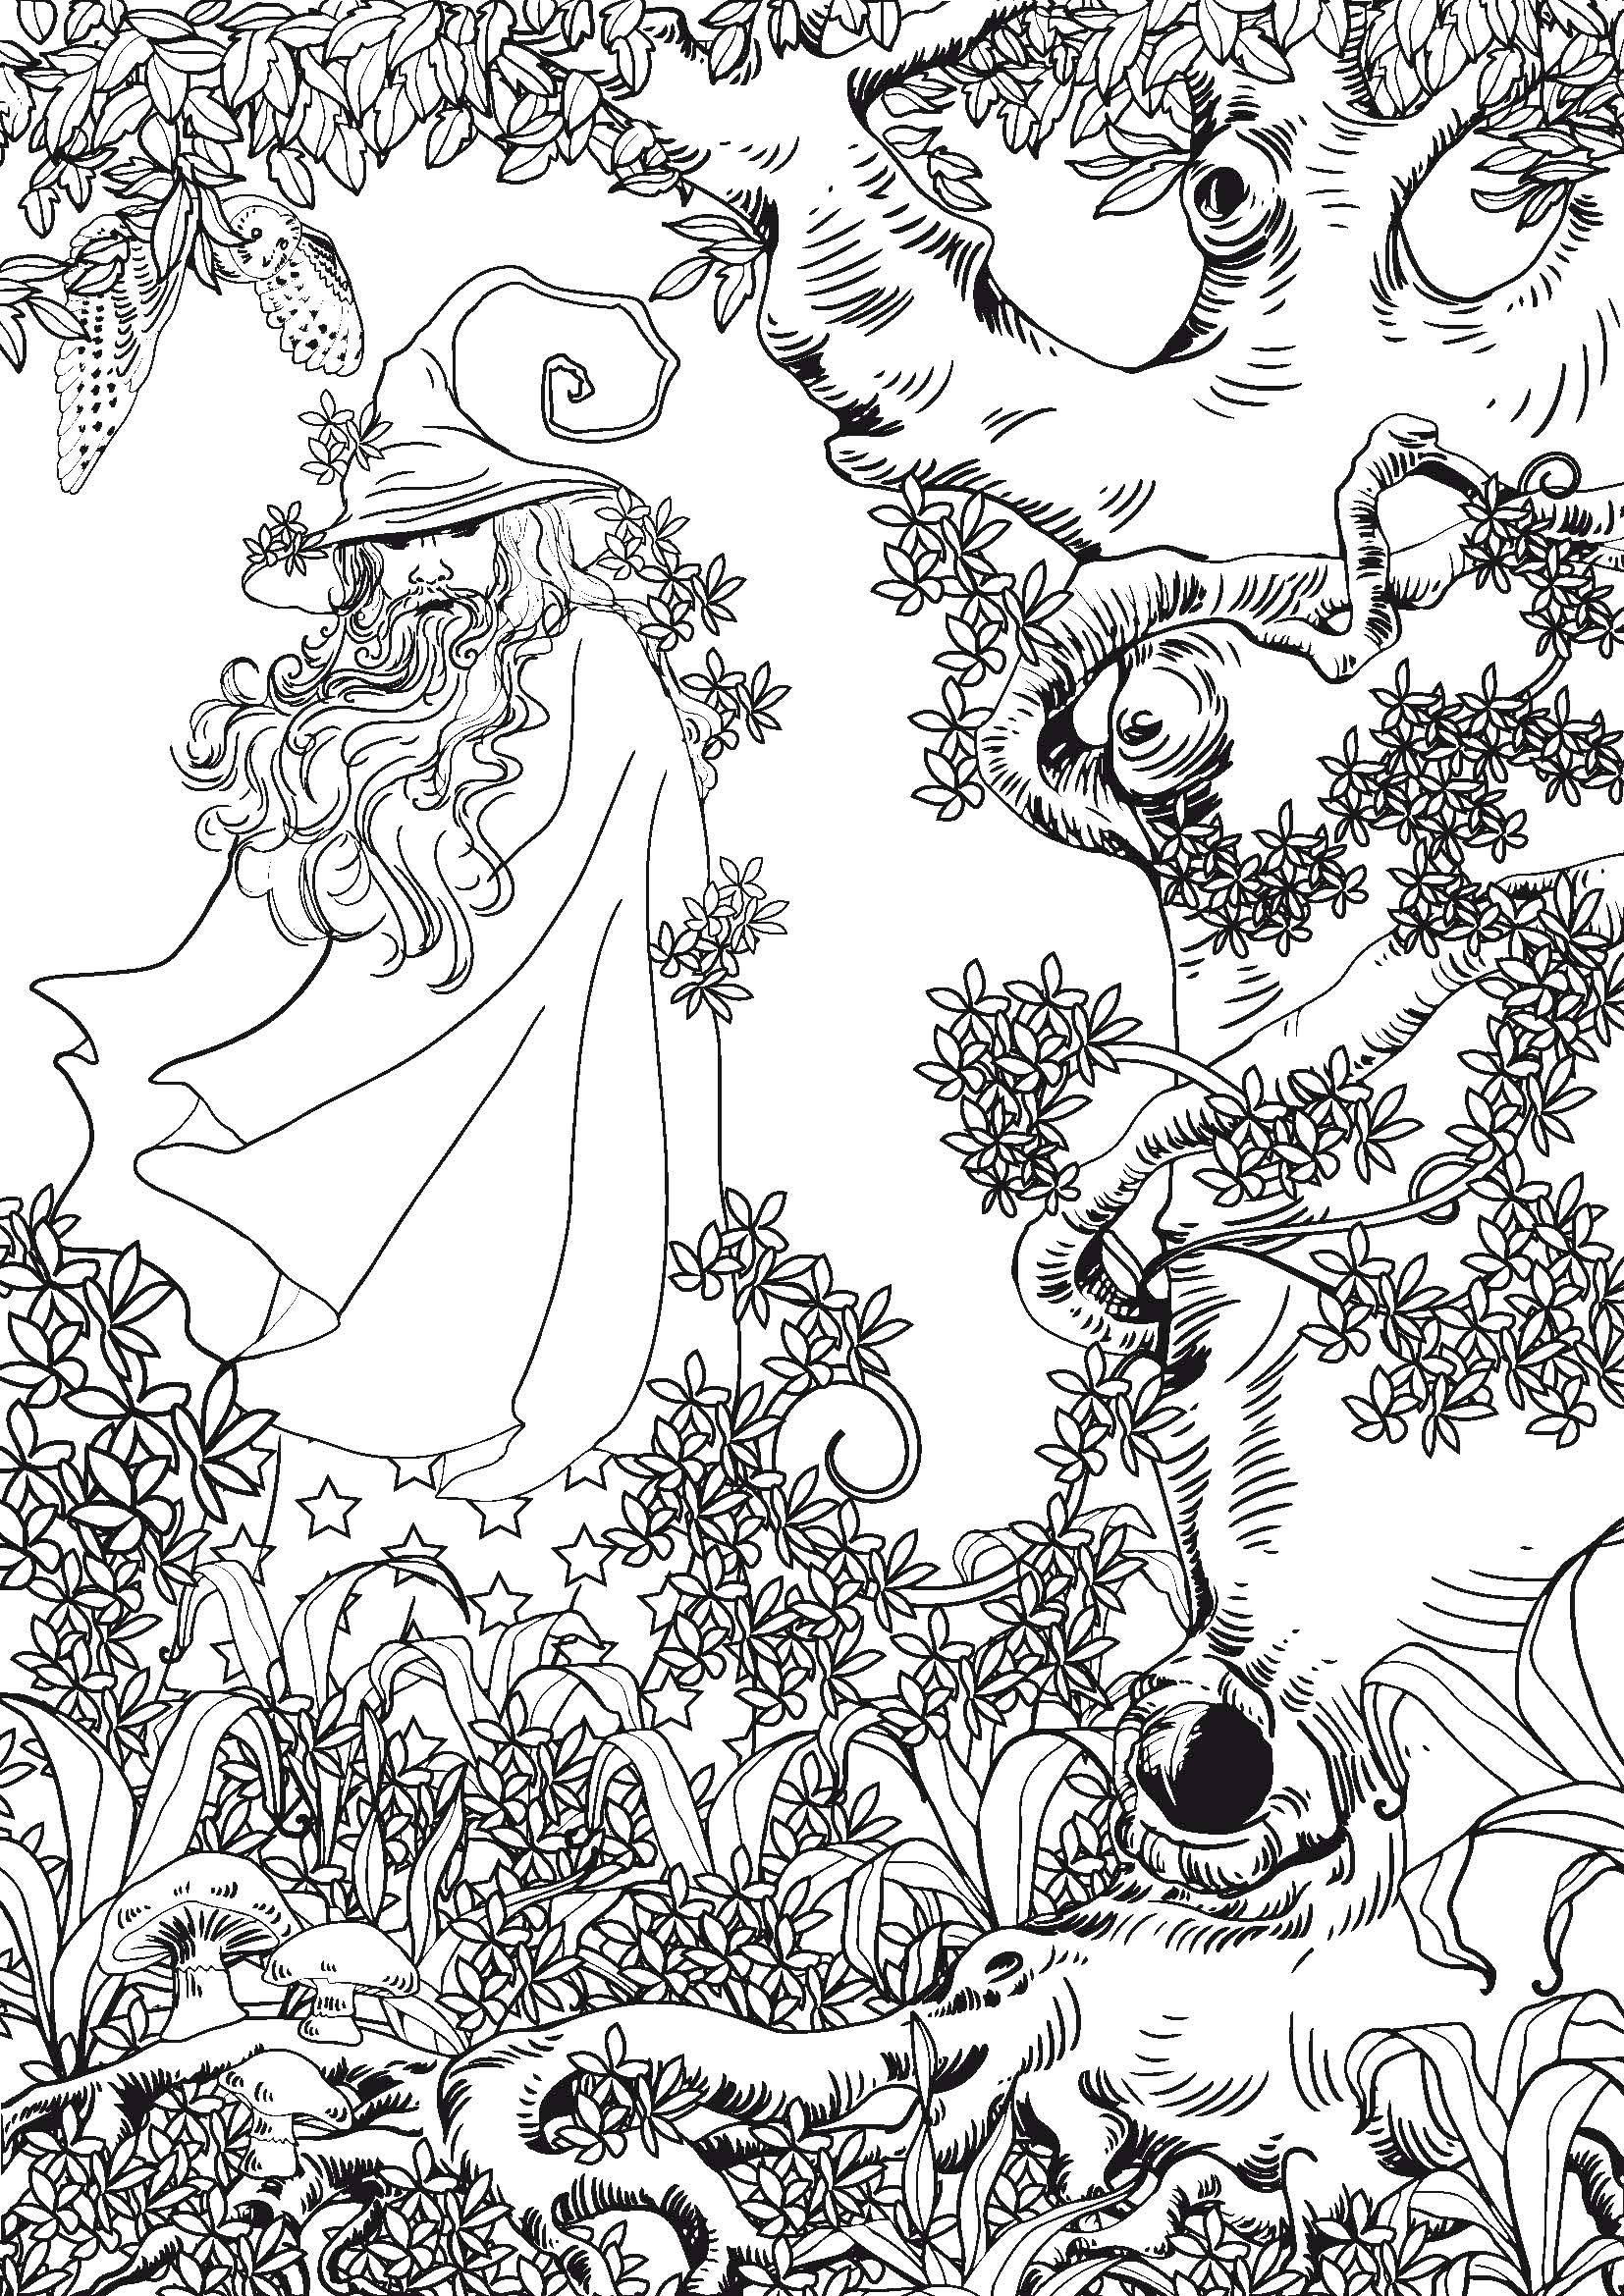 Coloring The warlock in the woods. Category coloring antistress. Tags:  wizard, forest, tree, flowers.